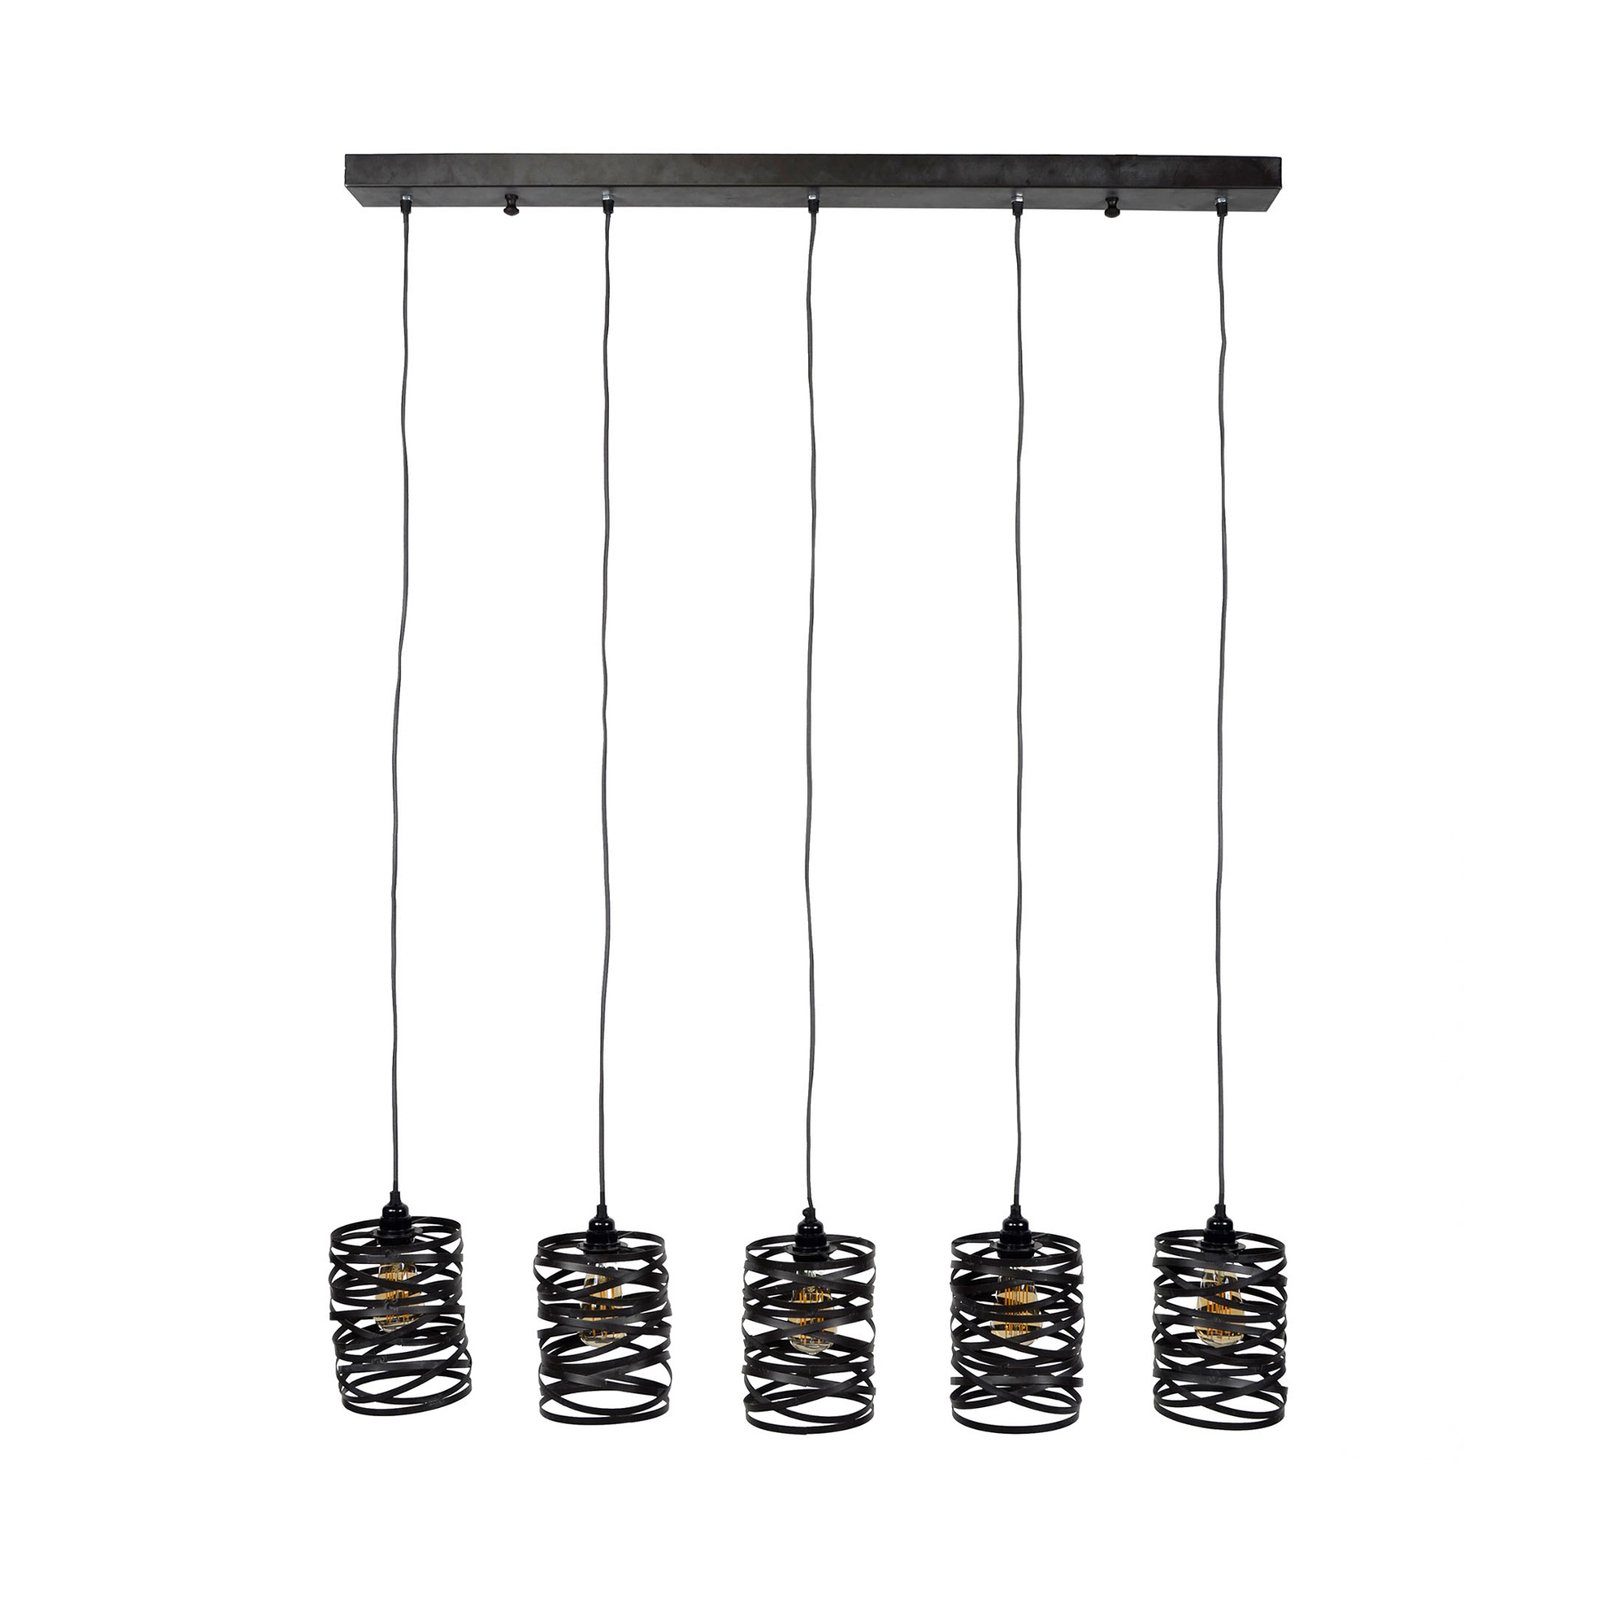 Spindlight hanglamp, 5-lamps